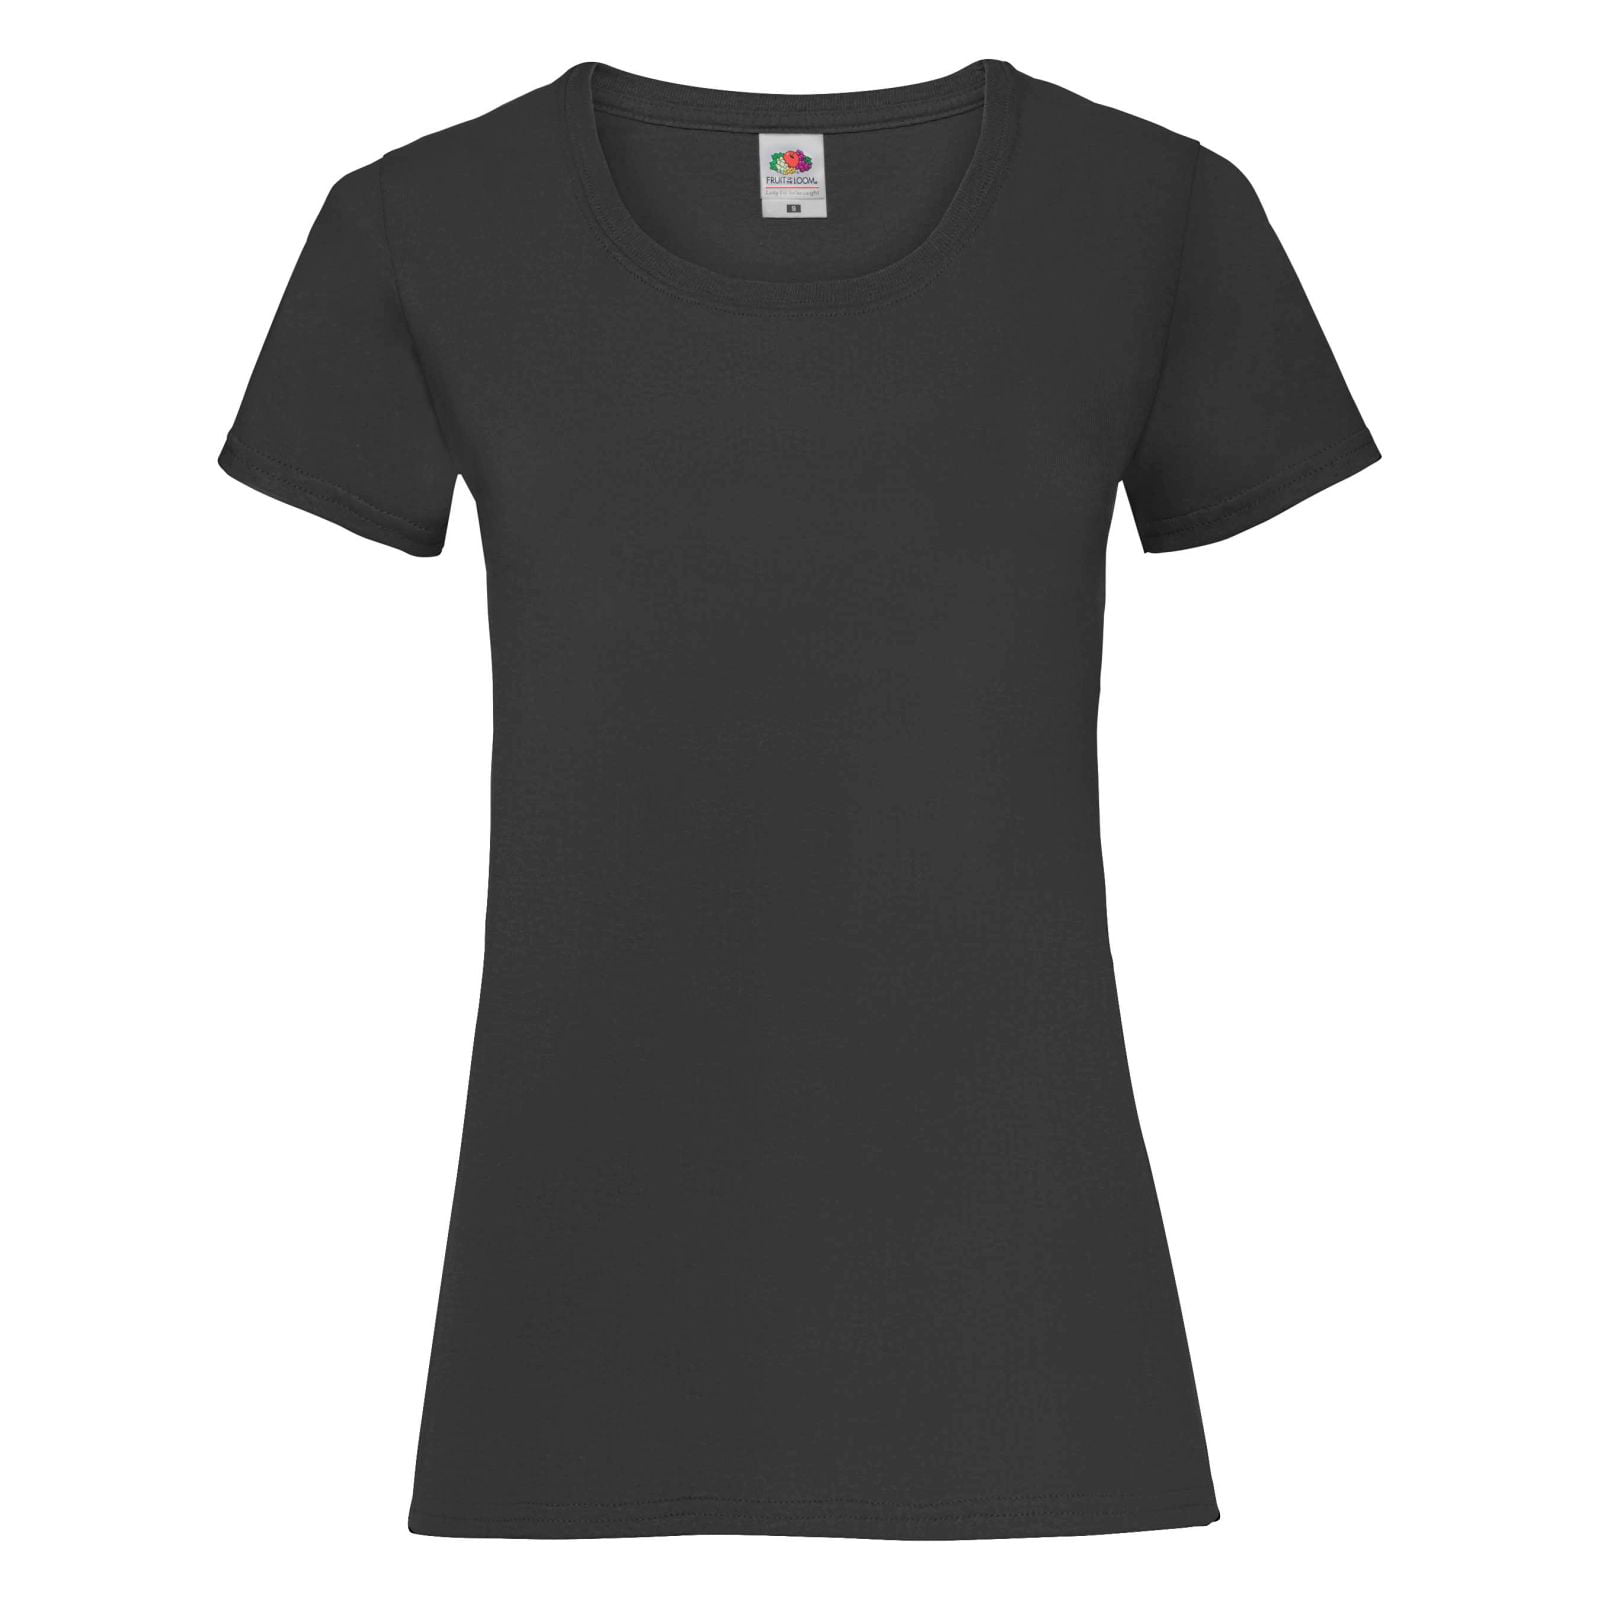 Fruit of the Loom Women's Short Sleeve Valueweight V-Neck T-Shirt Ladies Fit Top 